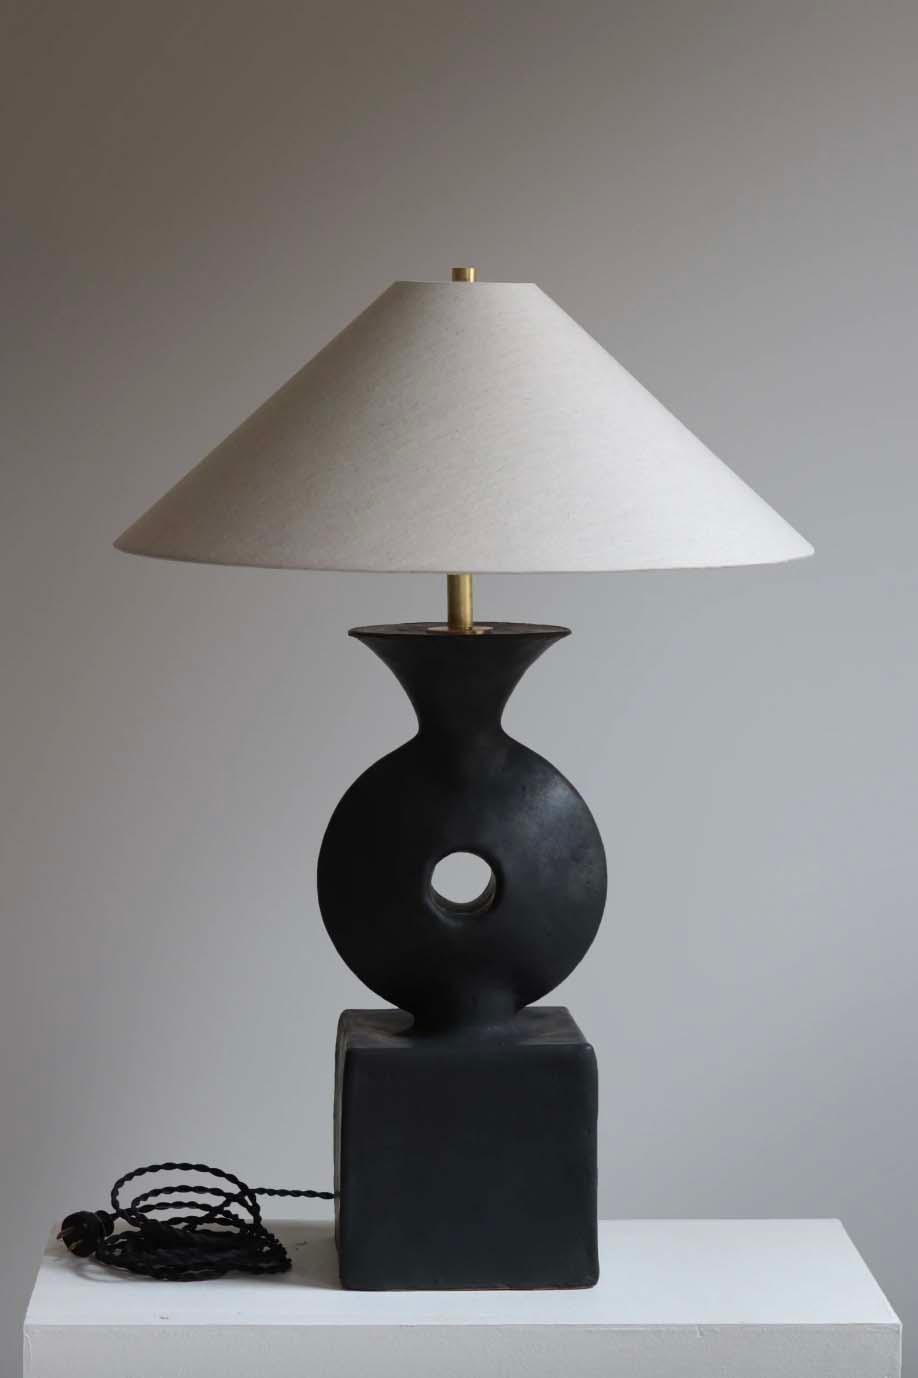 The Felix lamp is handmade studio pottery by ceramic artist by Danny Kaplan. Shade included. Please note exact dimensions may vary.

Born in New York City and raised in Aix-en-Provence, France, Danny Kaplan’s passion for ceramics was shaped by